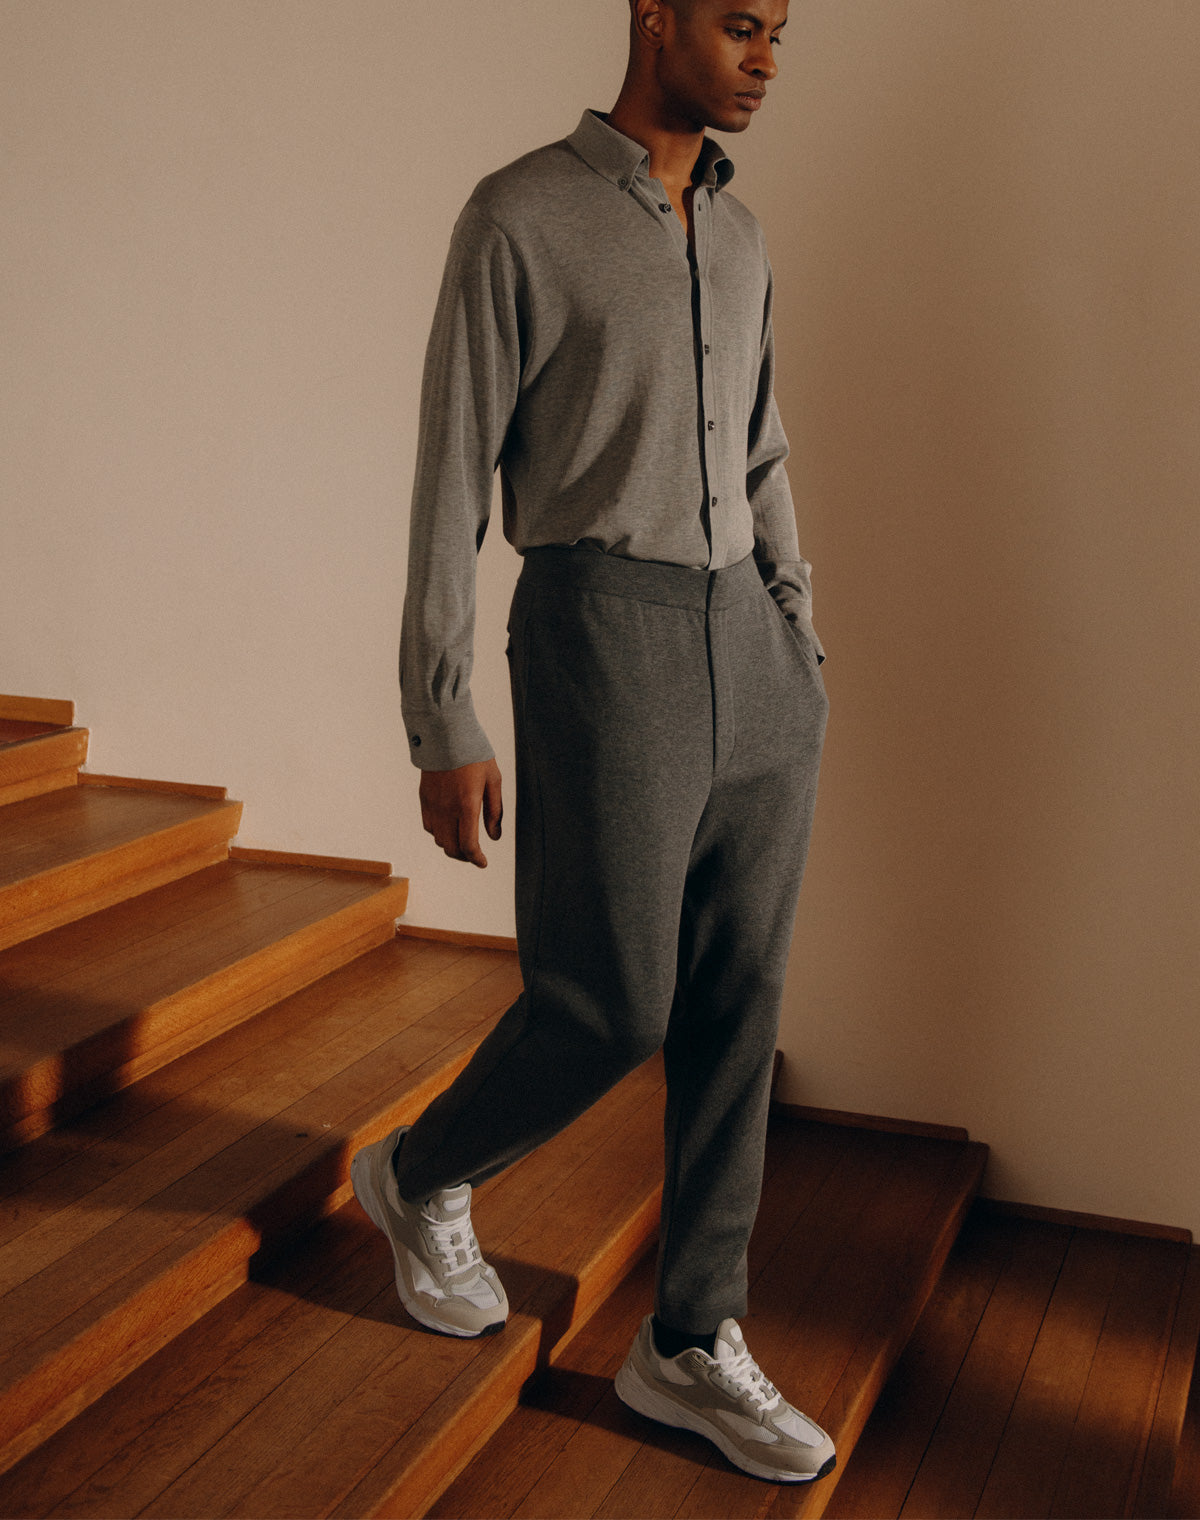 Model wearing the Men's Flat Front Knit Pant by Serino